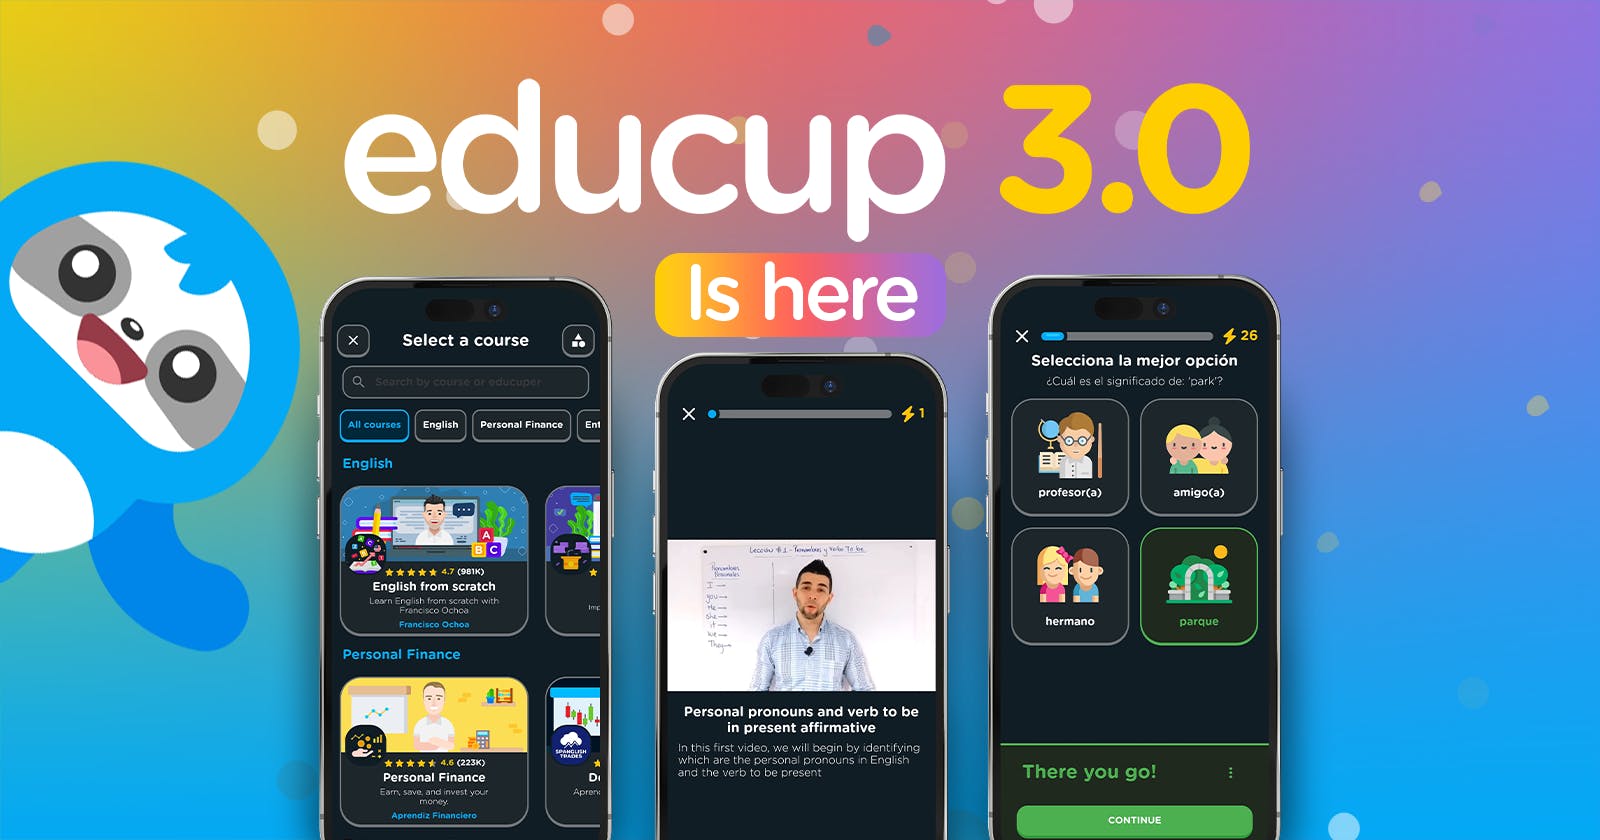 EducUp App 3.0: Faster, more impactful, more you ✨